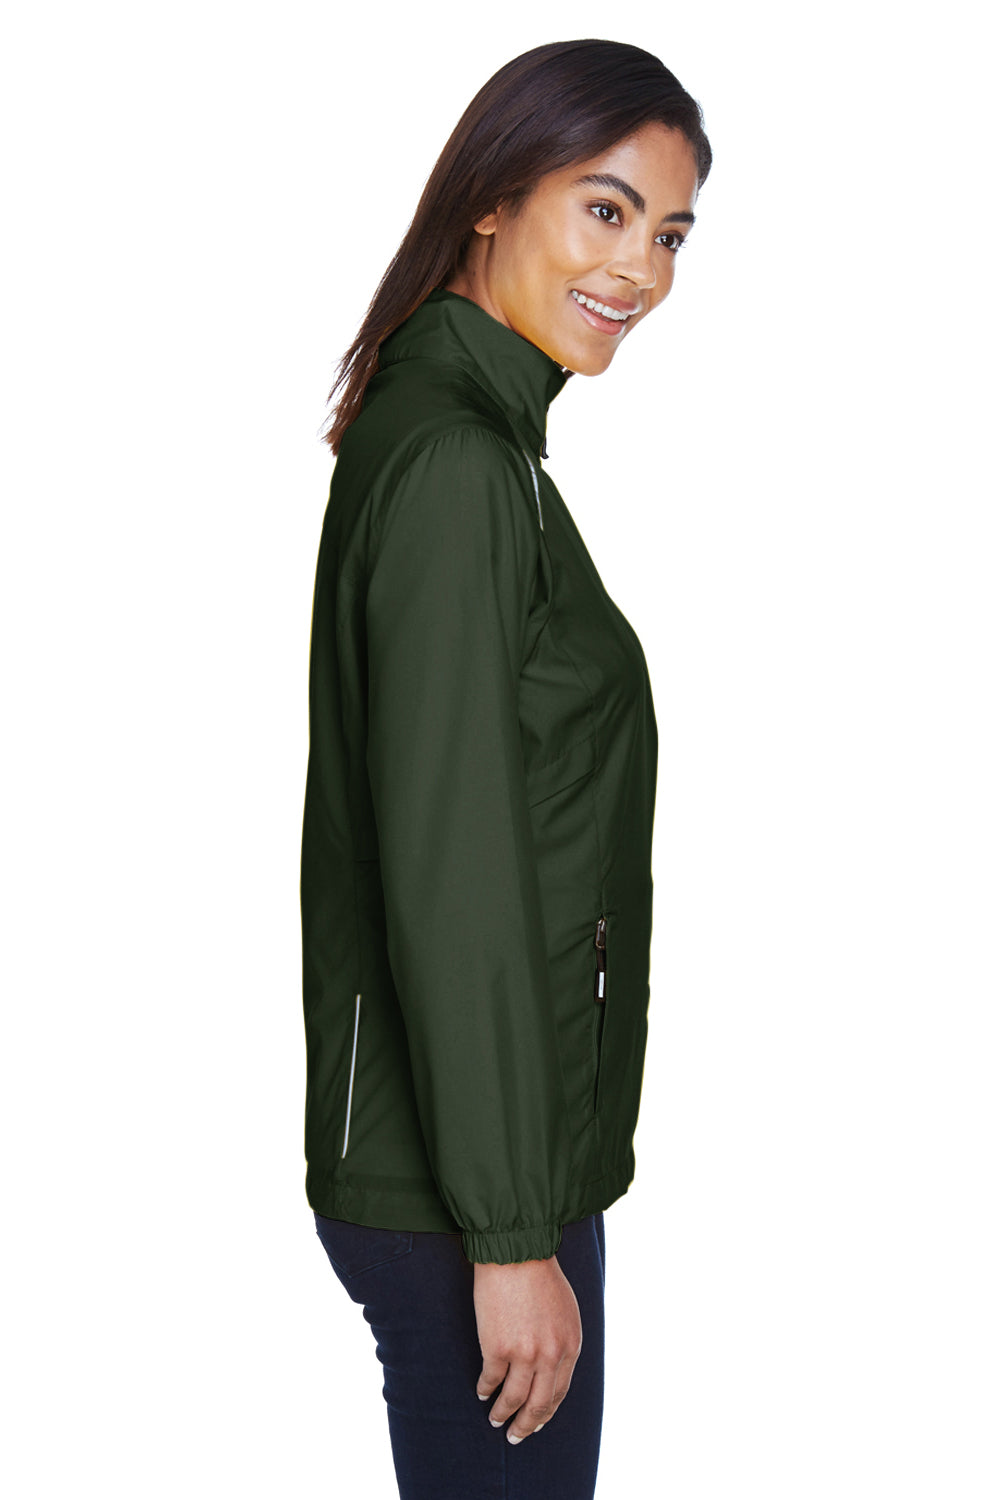 Core 365 78183 Womens Motivate Water Resistant Full Zip Jacket Forest Green Side